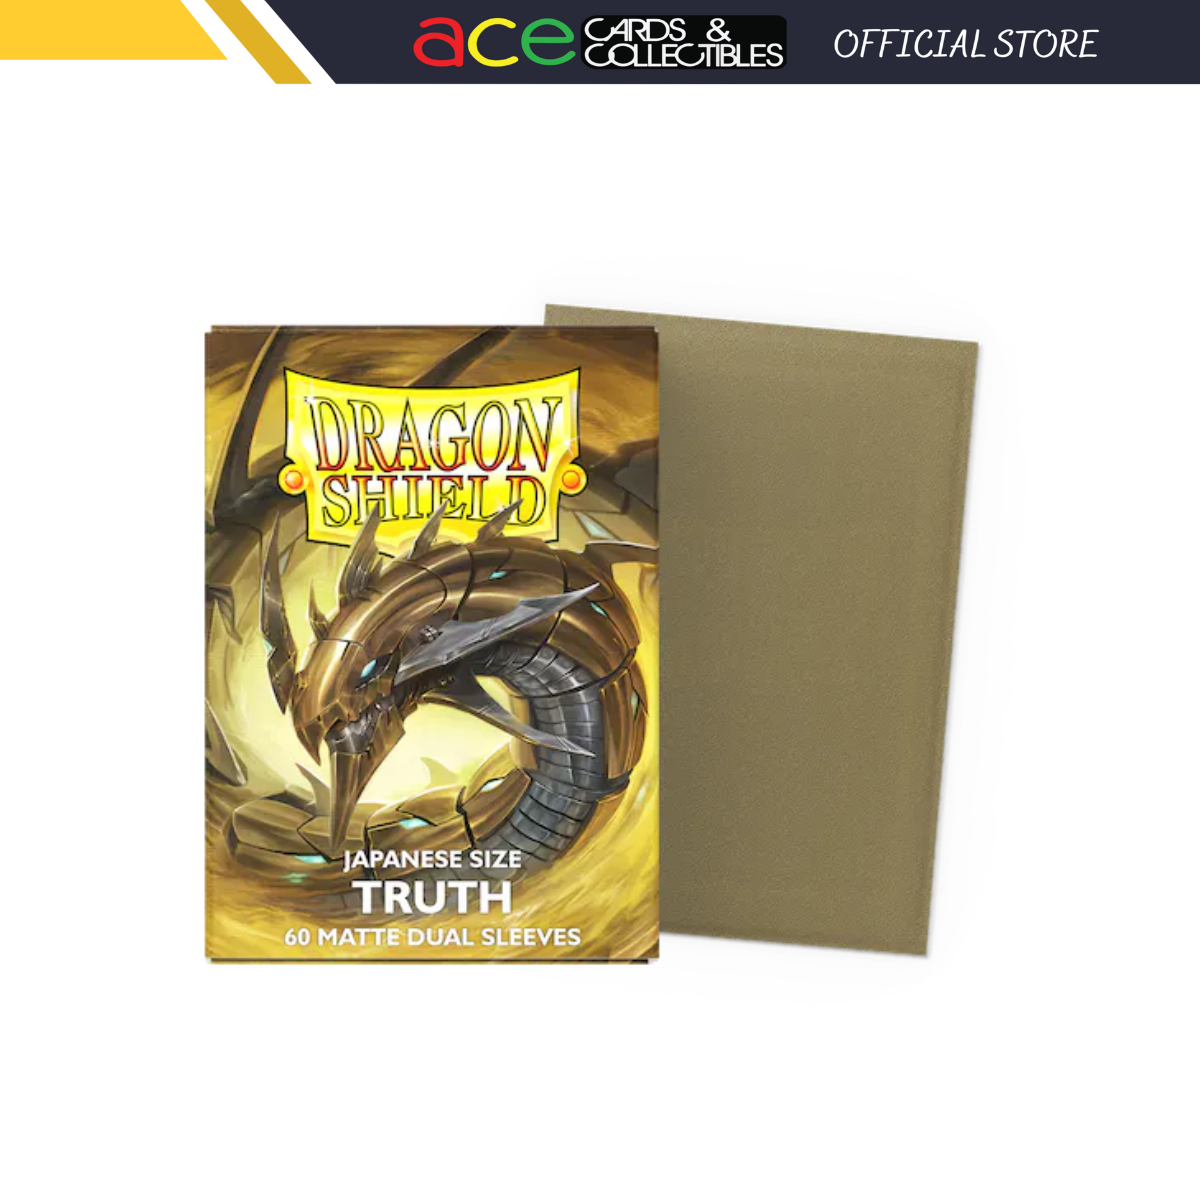 Dragon Shield Sleeve DS60J Matte DUAL Japanese size - Truth-Dragon Shield-Ace Cards &amp; Collectibles